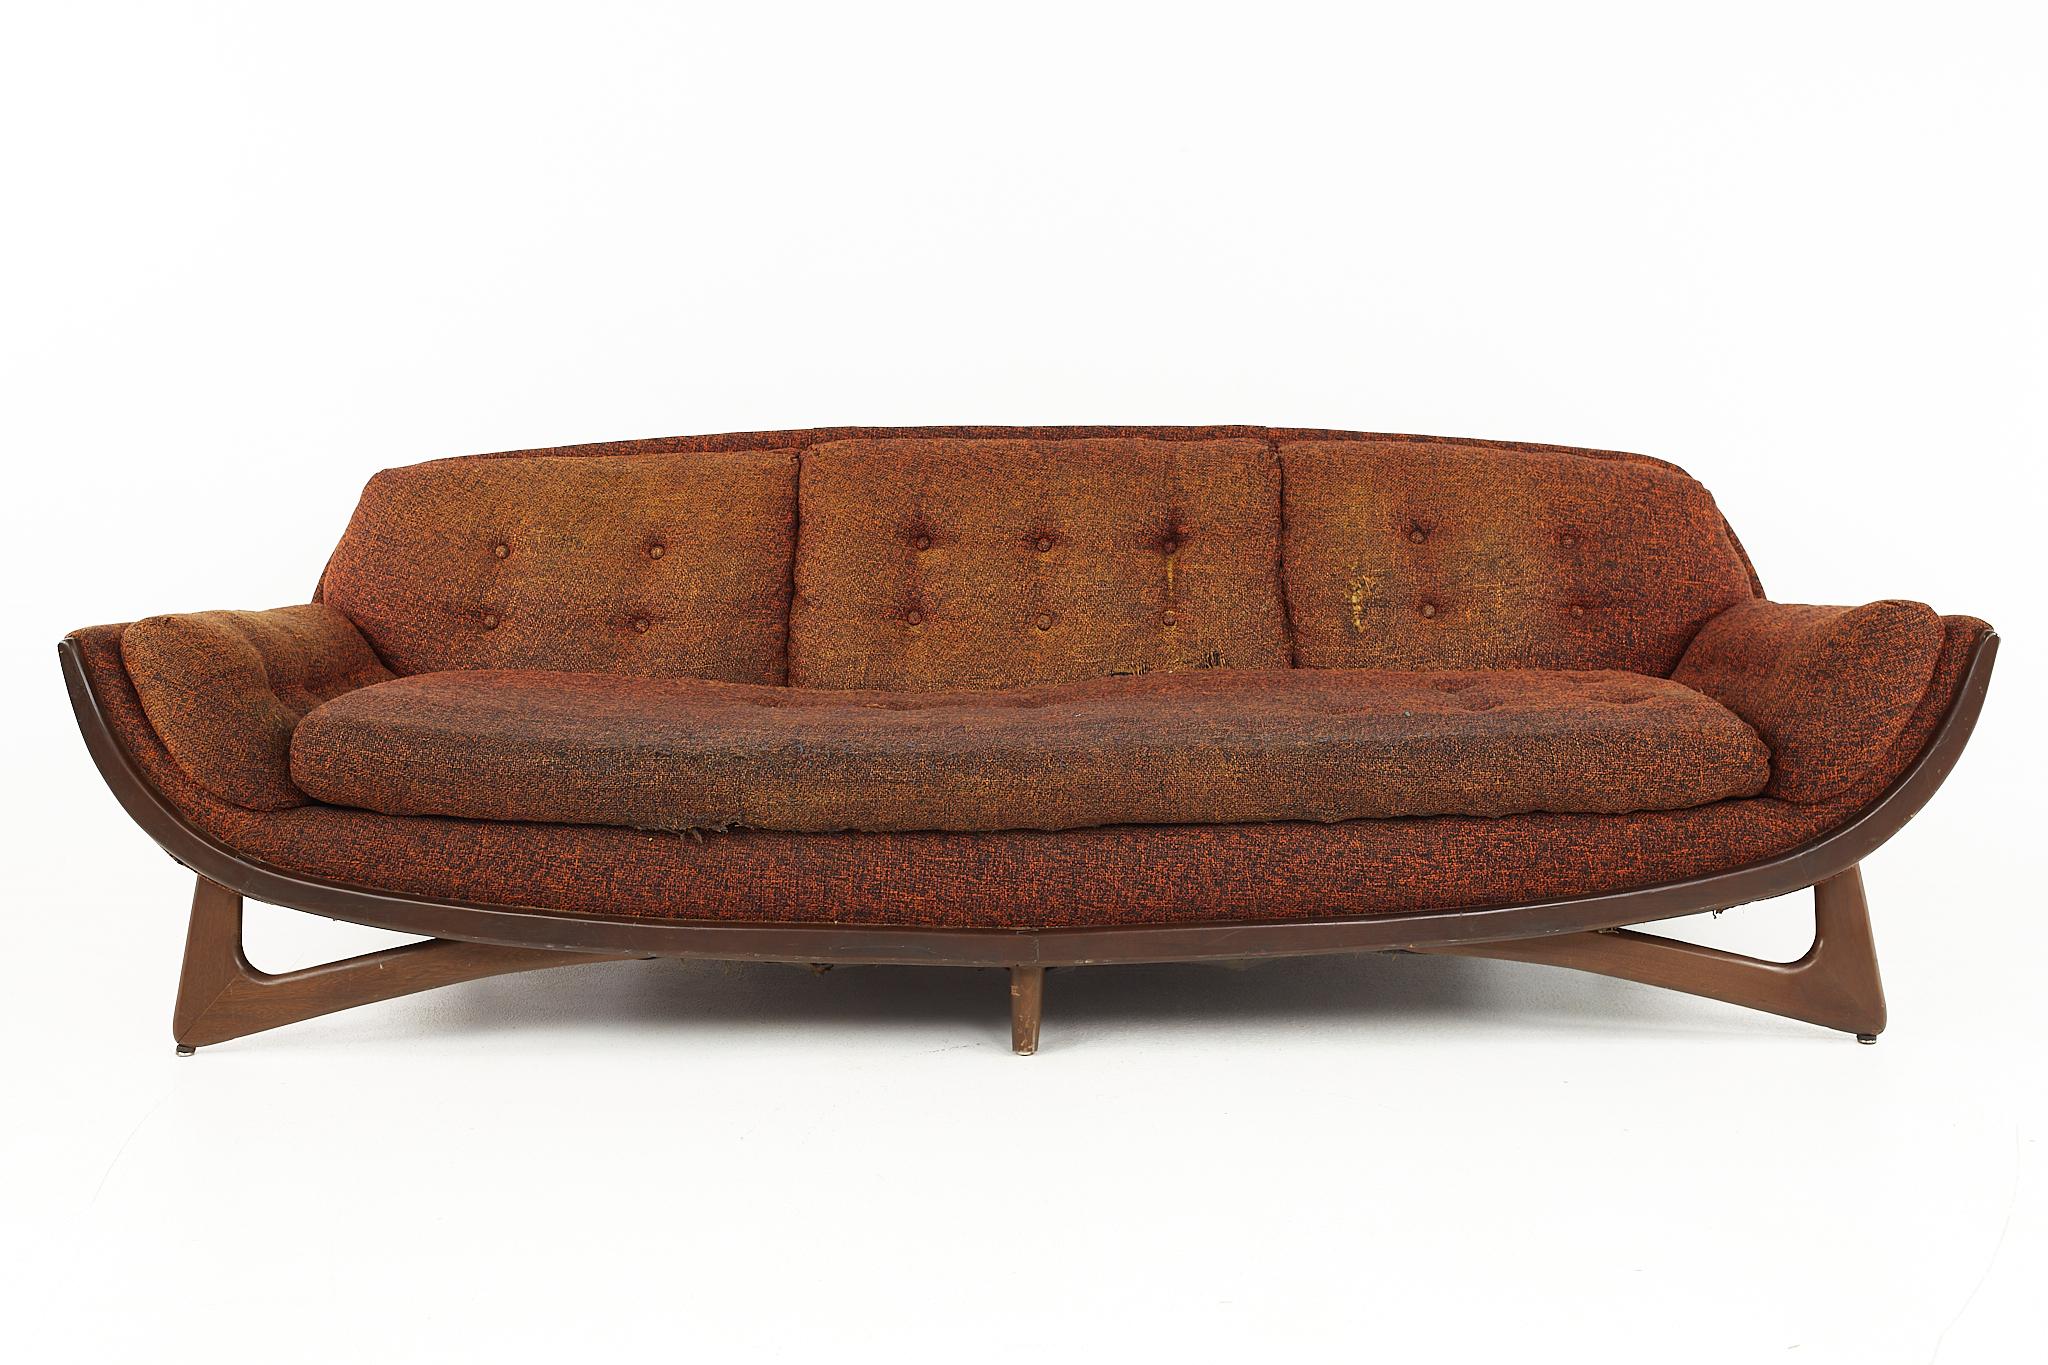 Adrian Pearsall Style Kroehler Mid Century Walnut Gondola Sofa

The sofa measures: 93 wide x 33 deep x 29.5 high, with a seat height of 15 inches and an arm height of 20.5 inches

Ready for new upholstery. This service is available for an